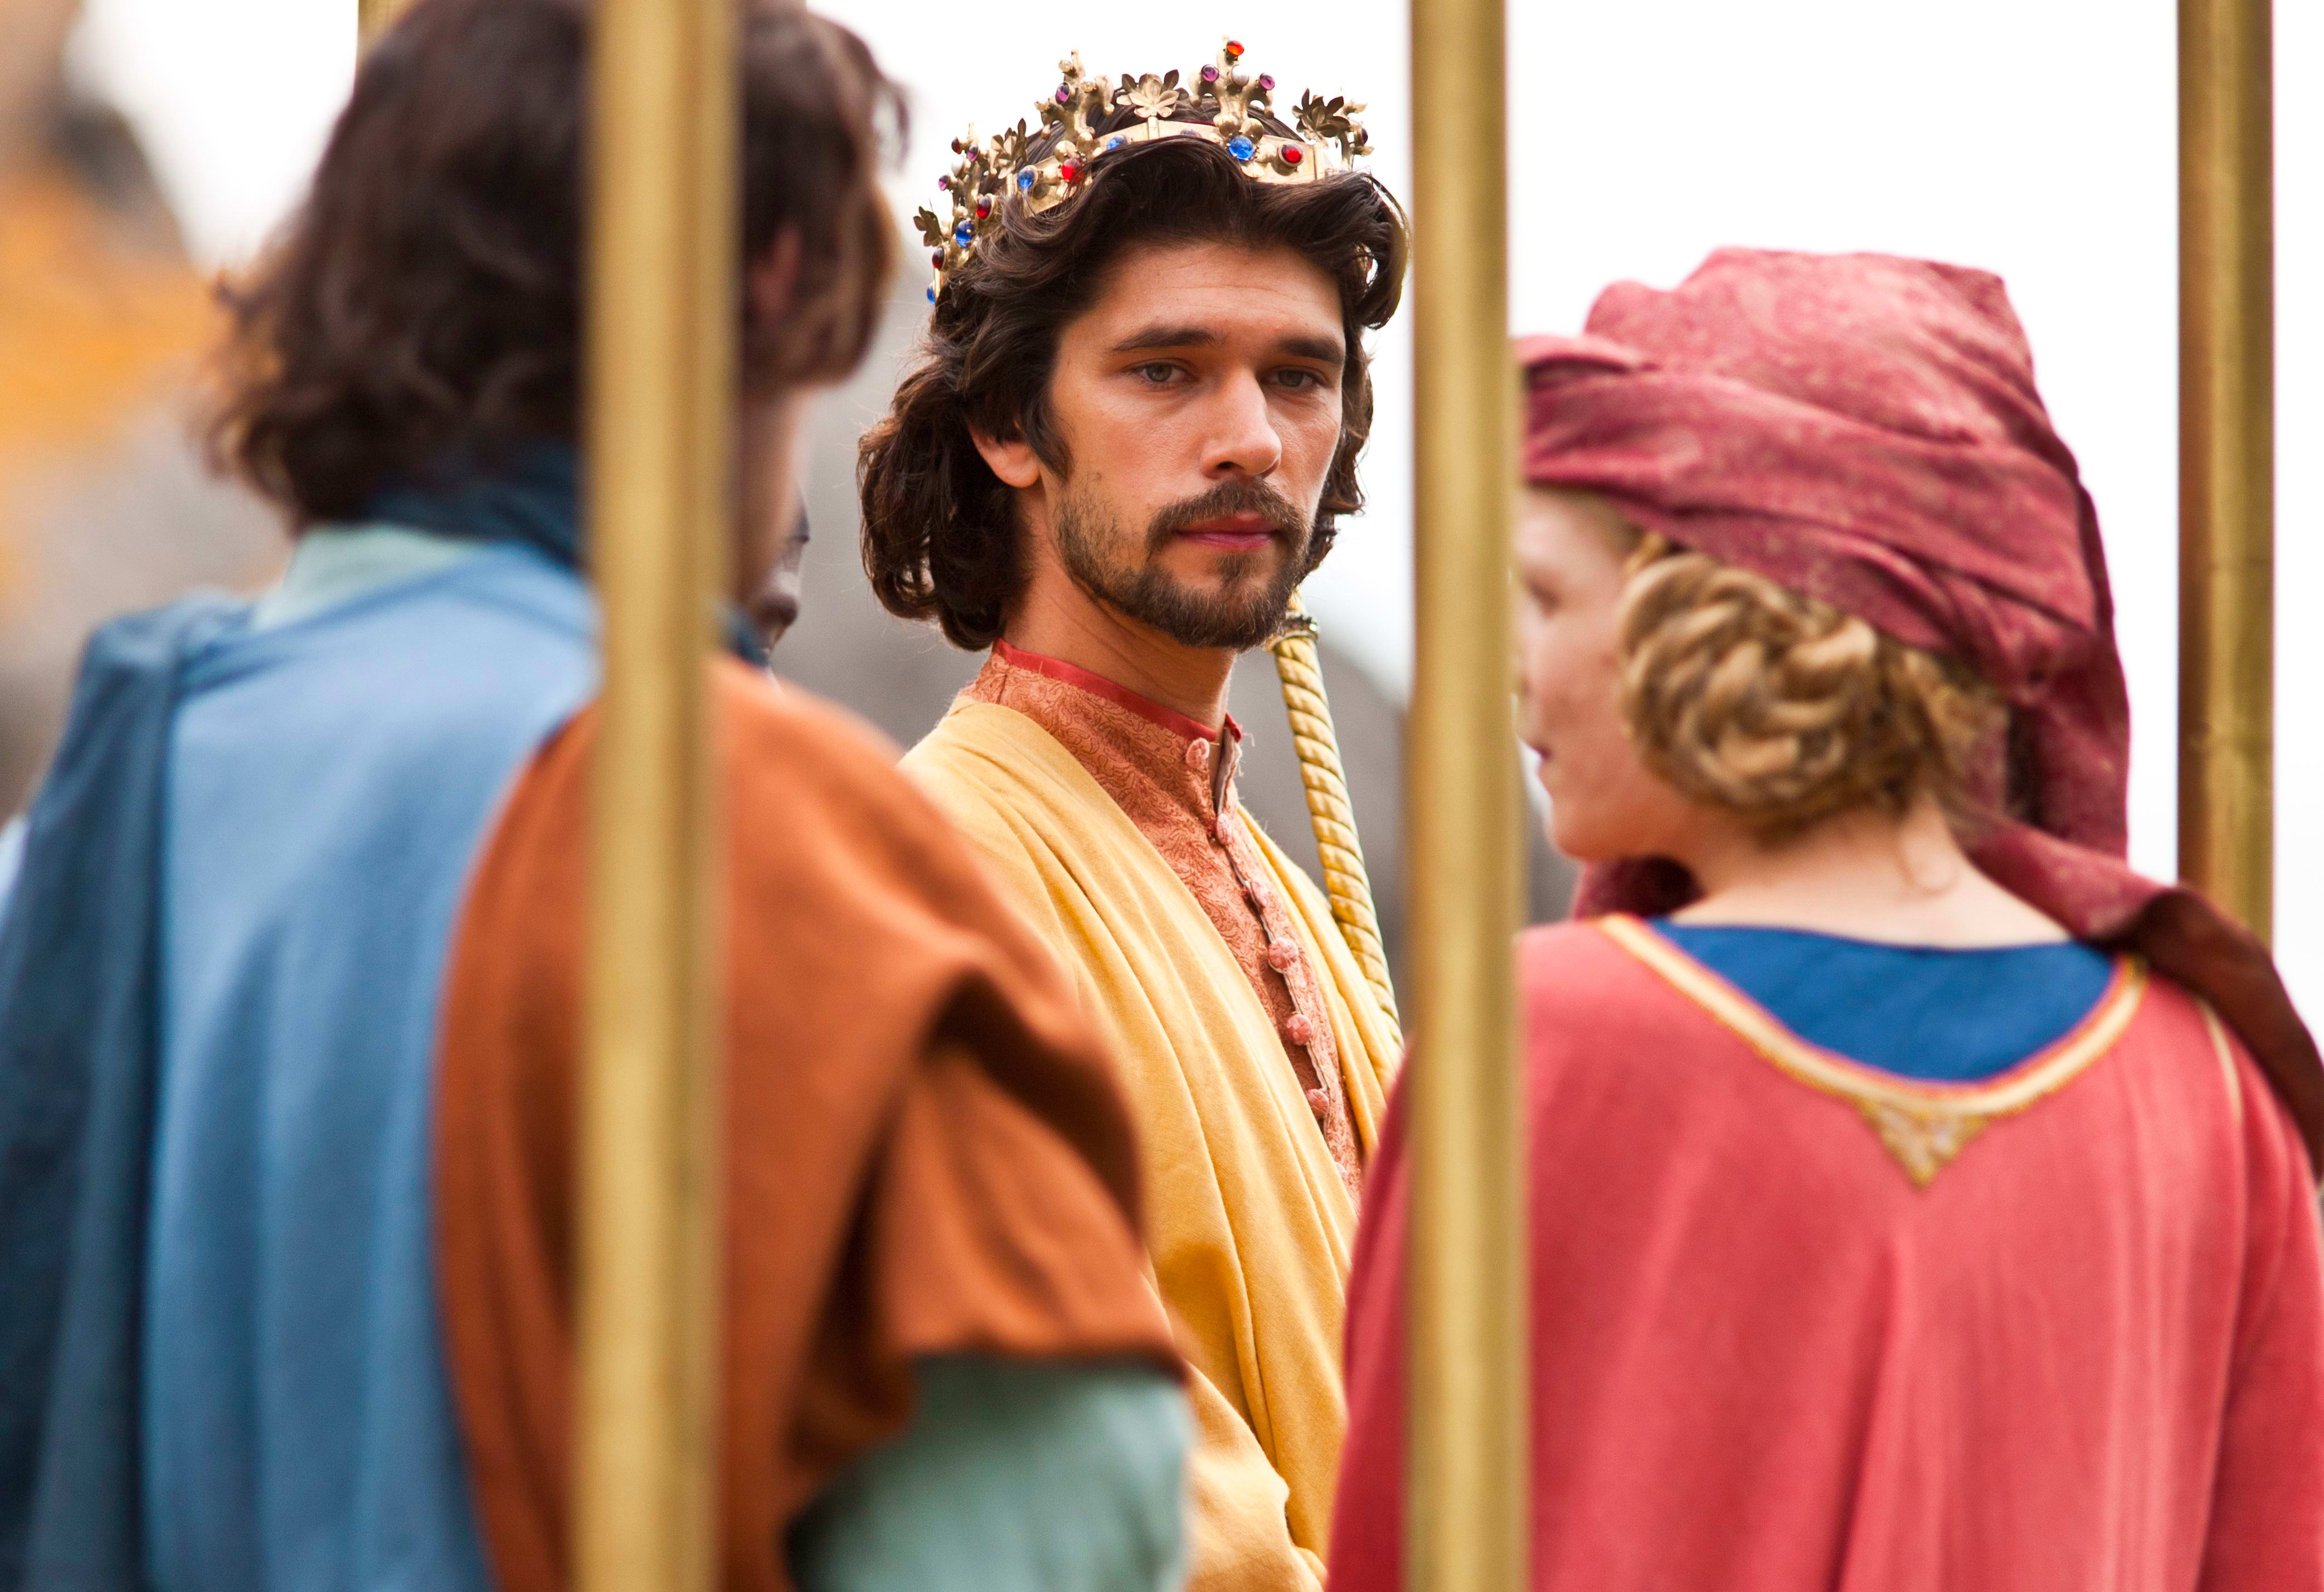 Ben Whishaw dressed in a crown and robes as Richard the Second in The Hollow Crown 